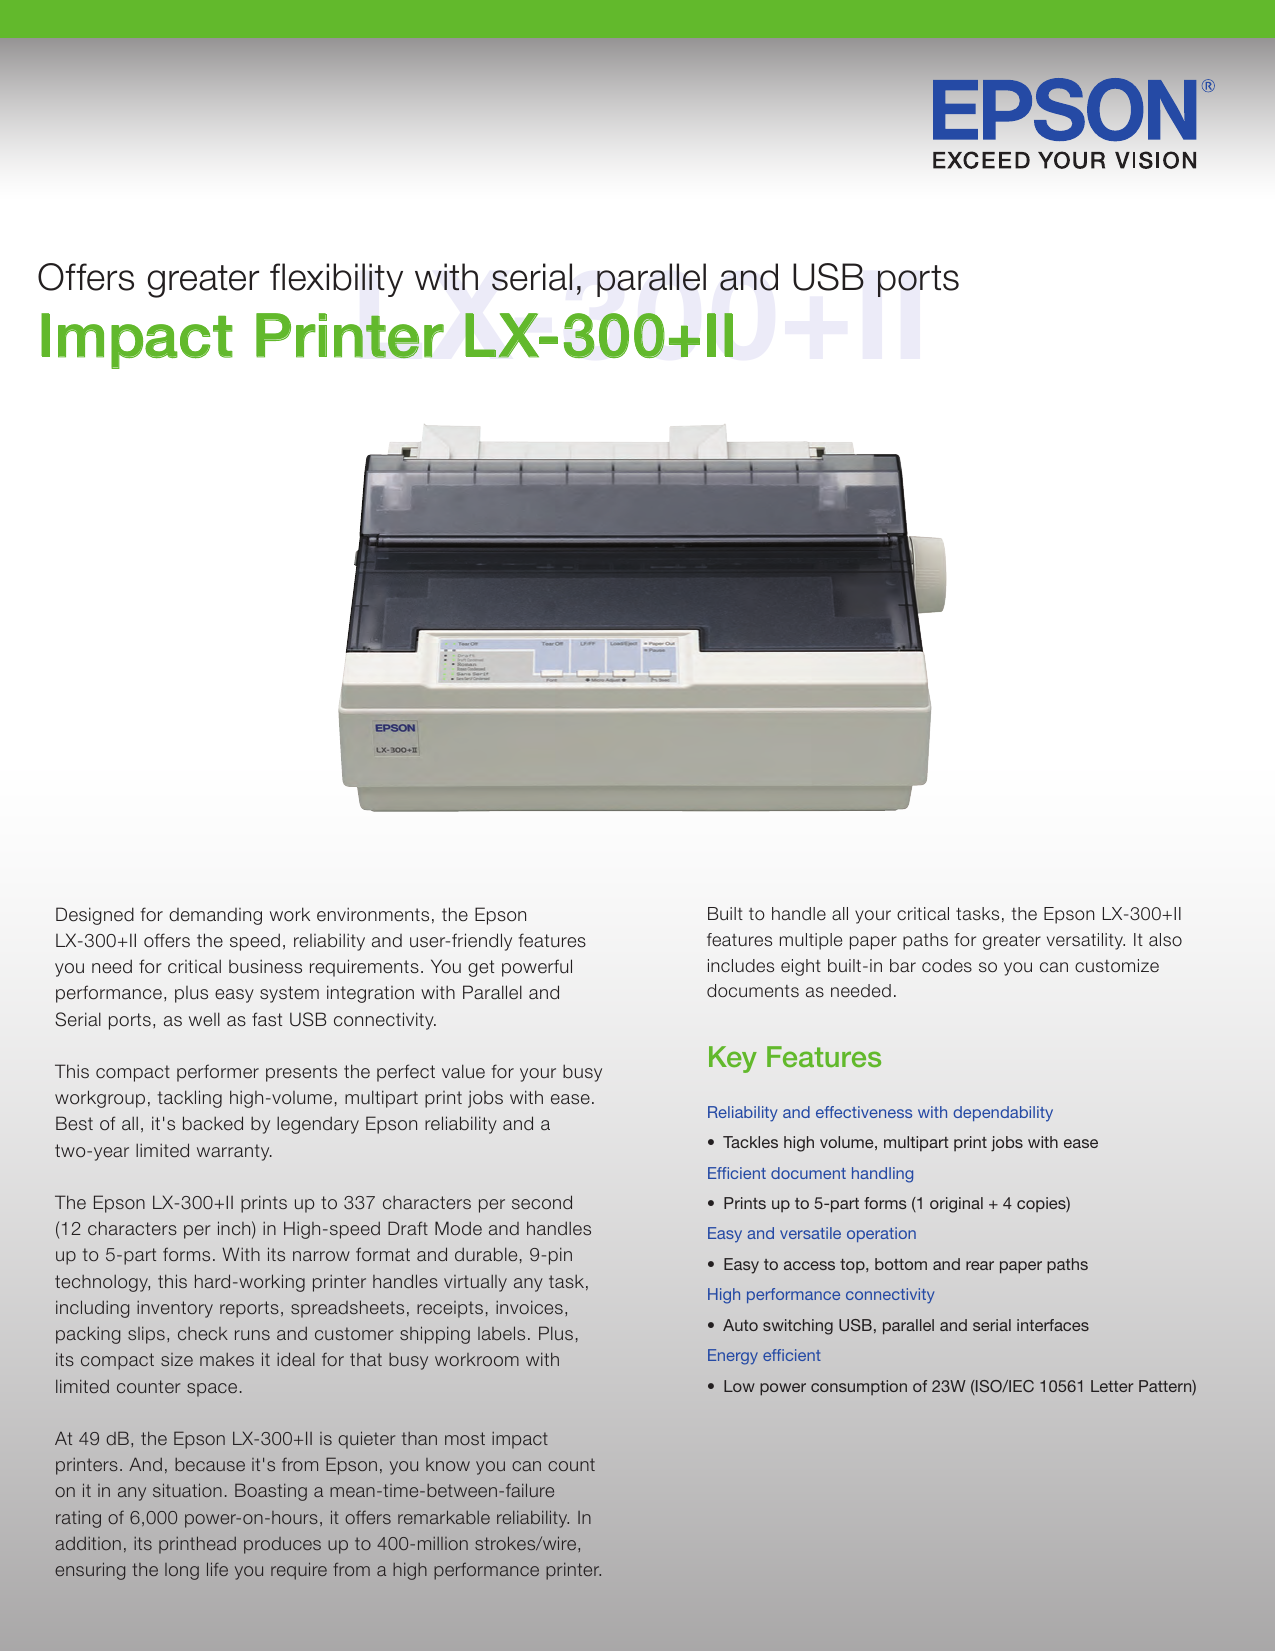 epson lx 300 ii software free download